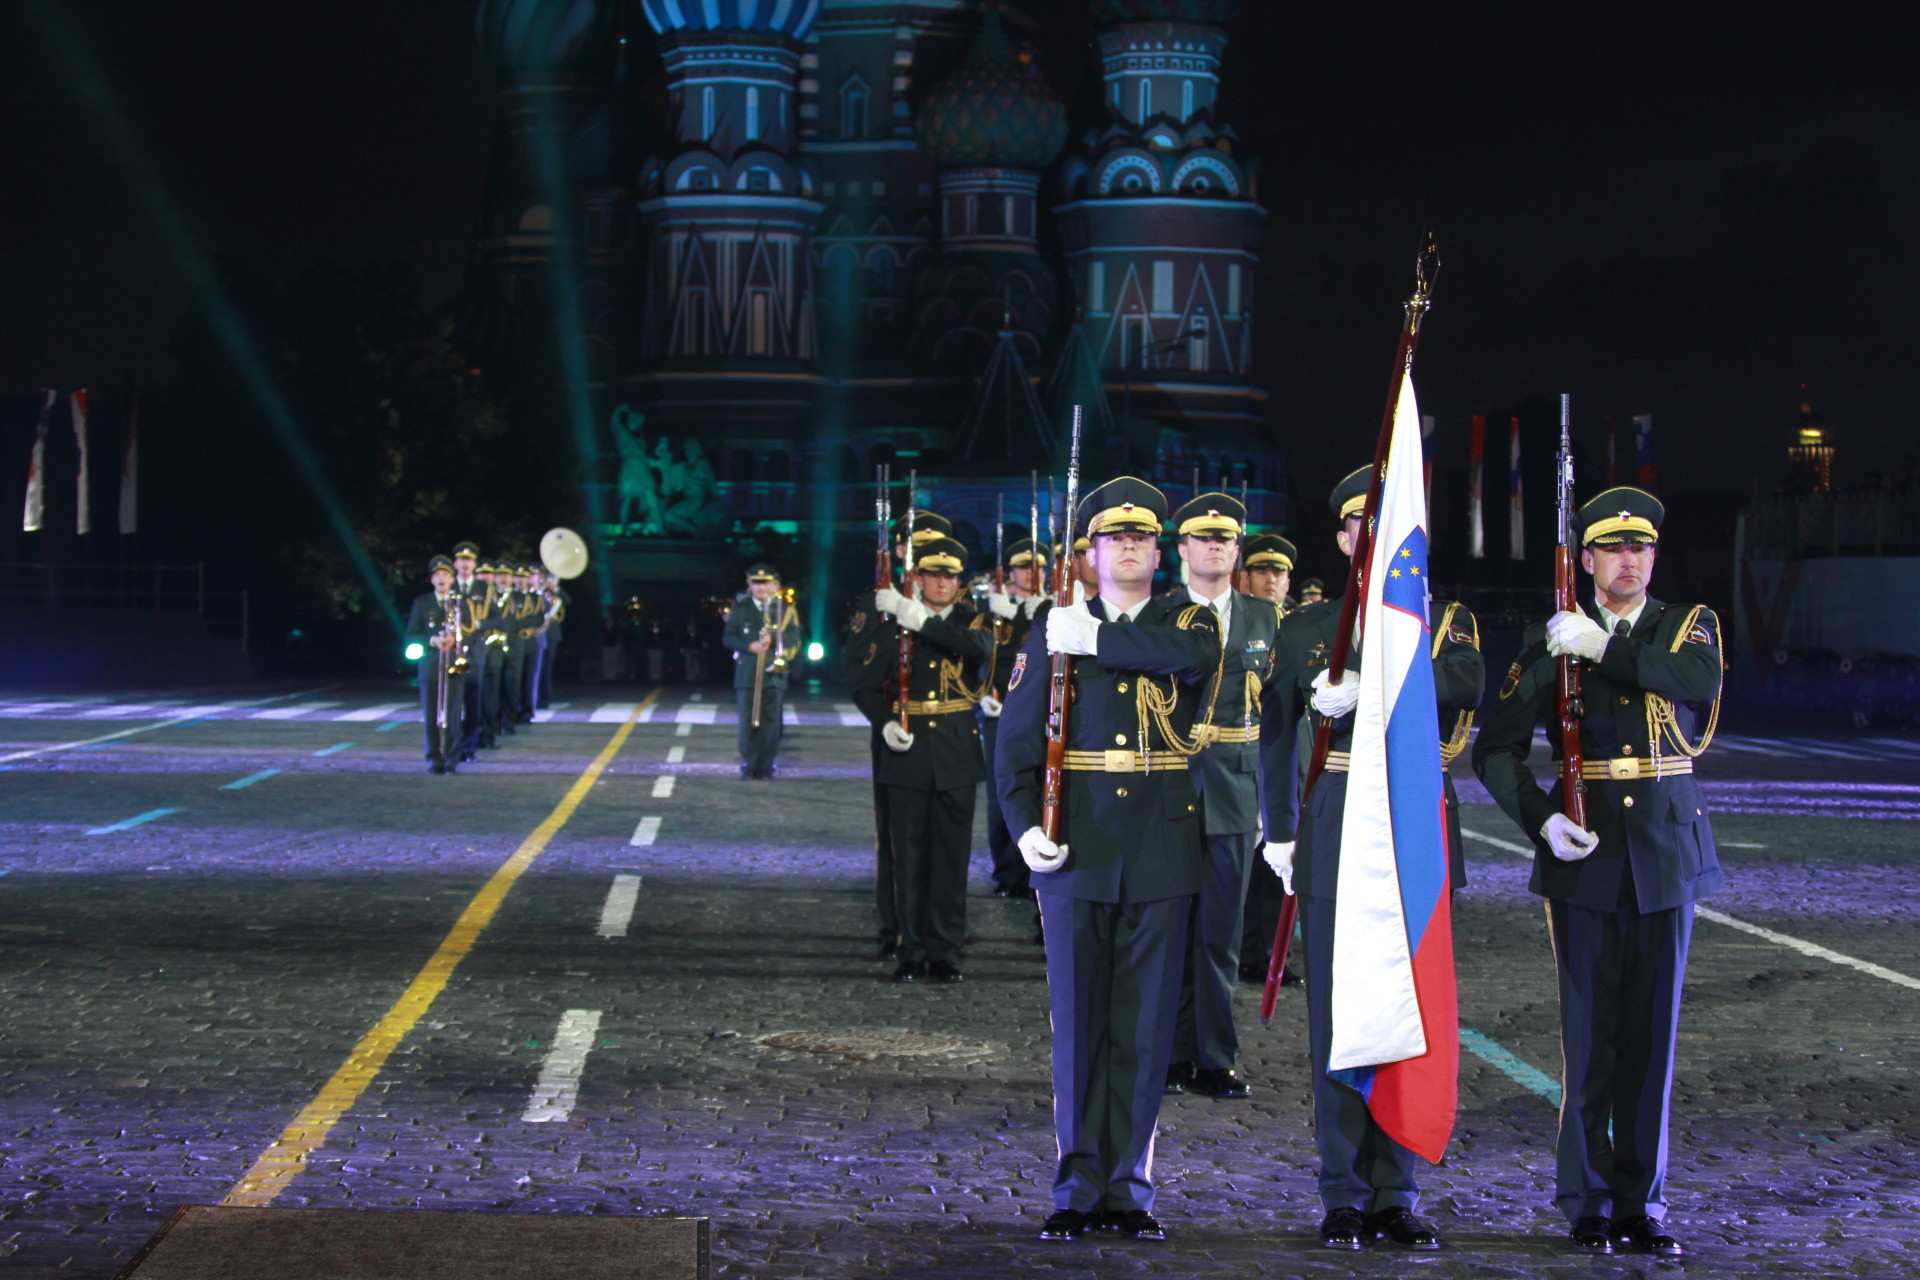 The Slovenian Armed Forces Band and Honor Guard Unit.